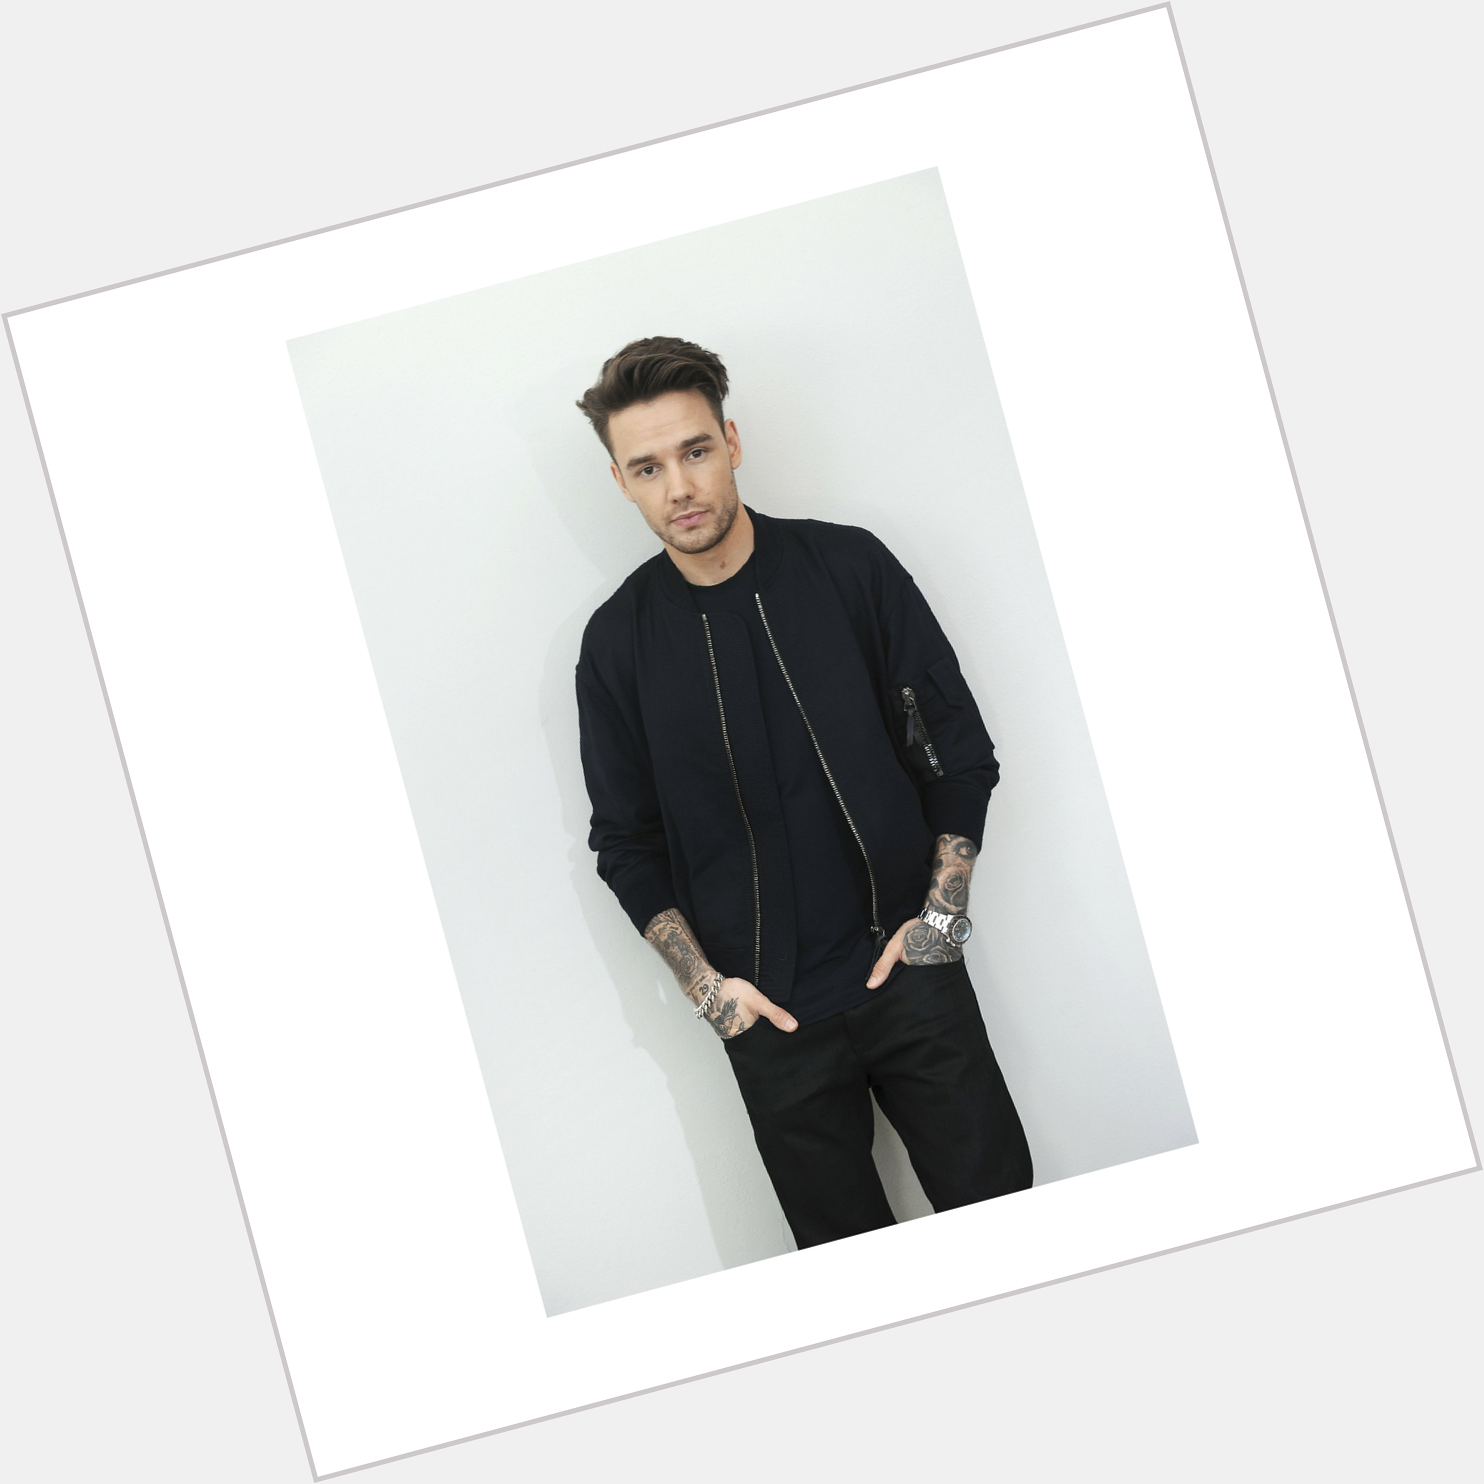 Happy Birthday
Liam Payne
Wish you all the best
God bless you
I love you 